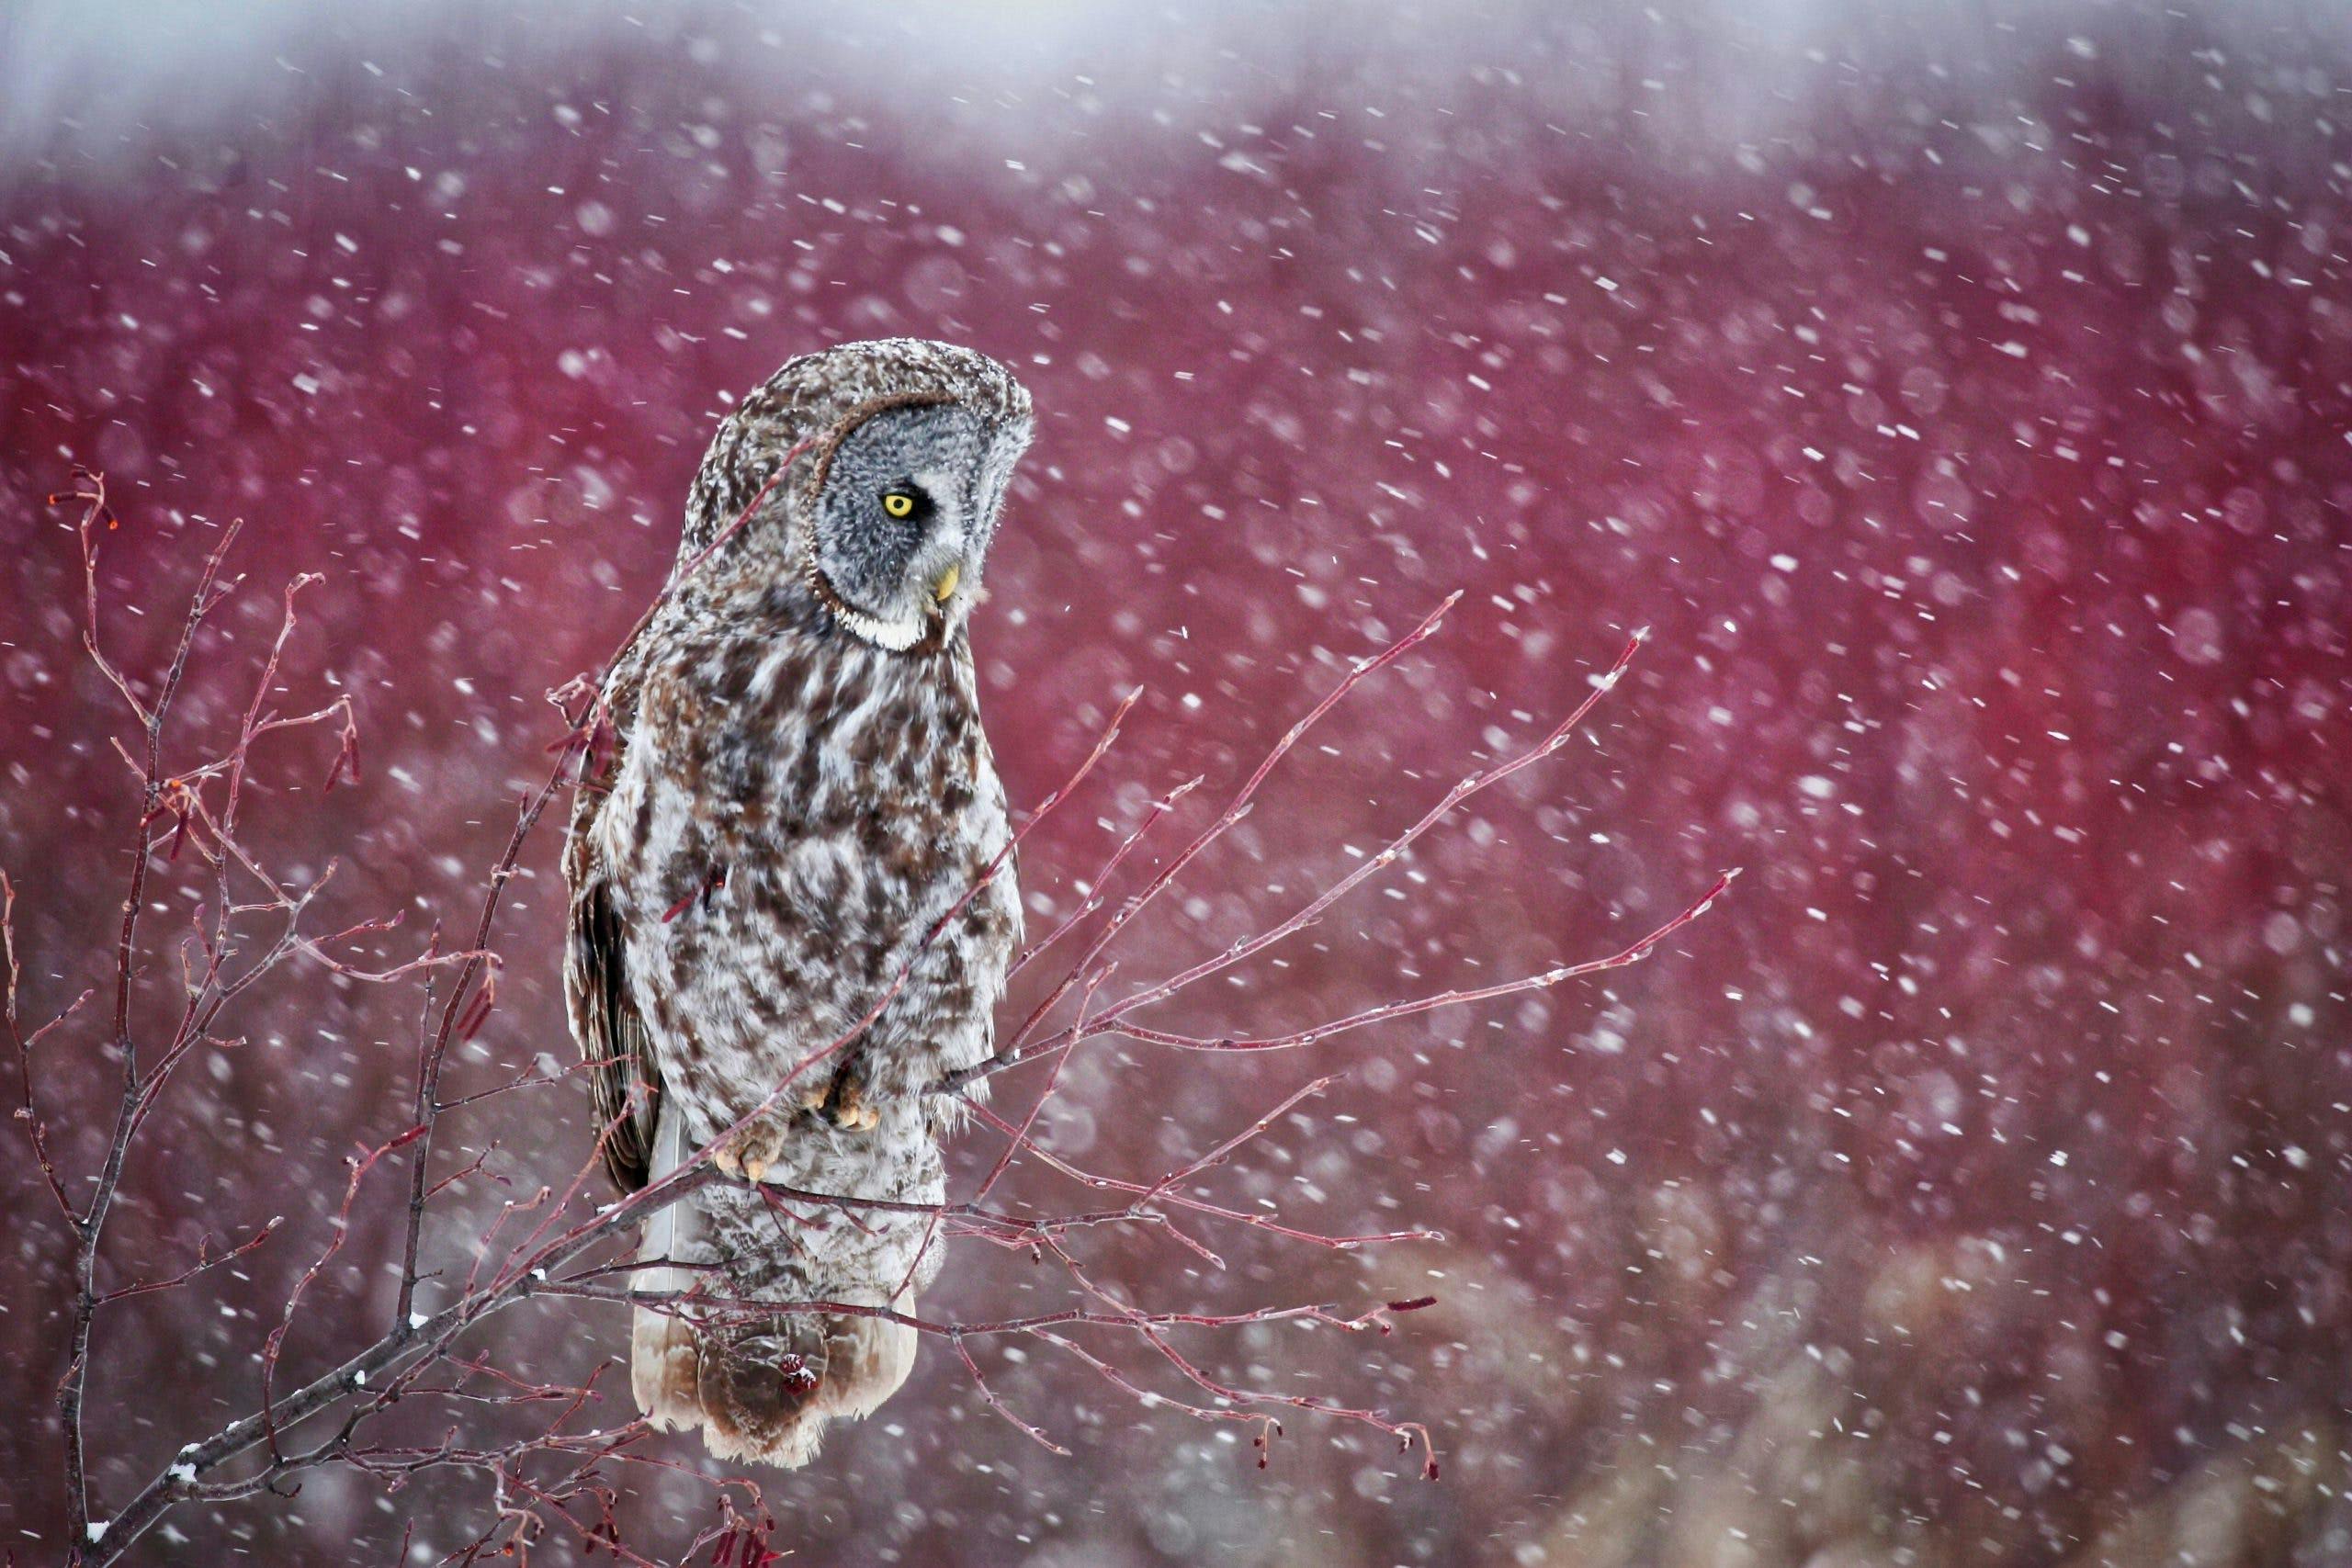 Grey owl sitting on a branch with snowflakes swirling around